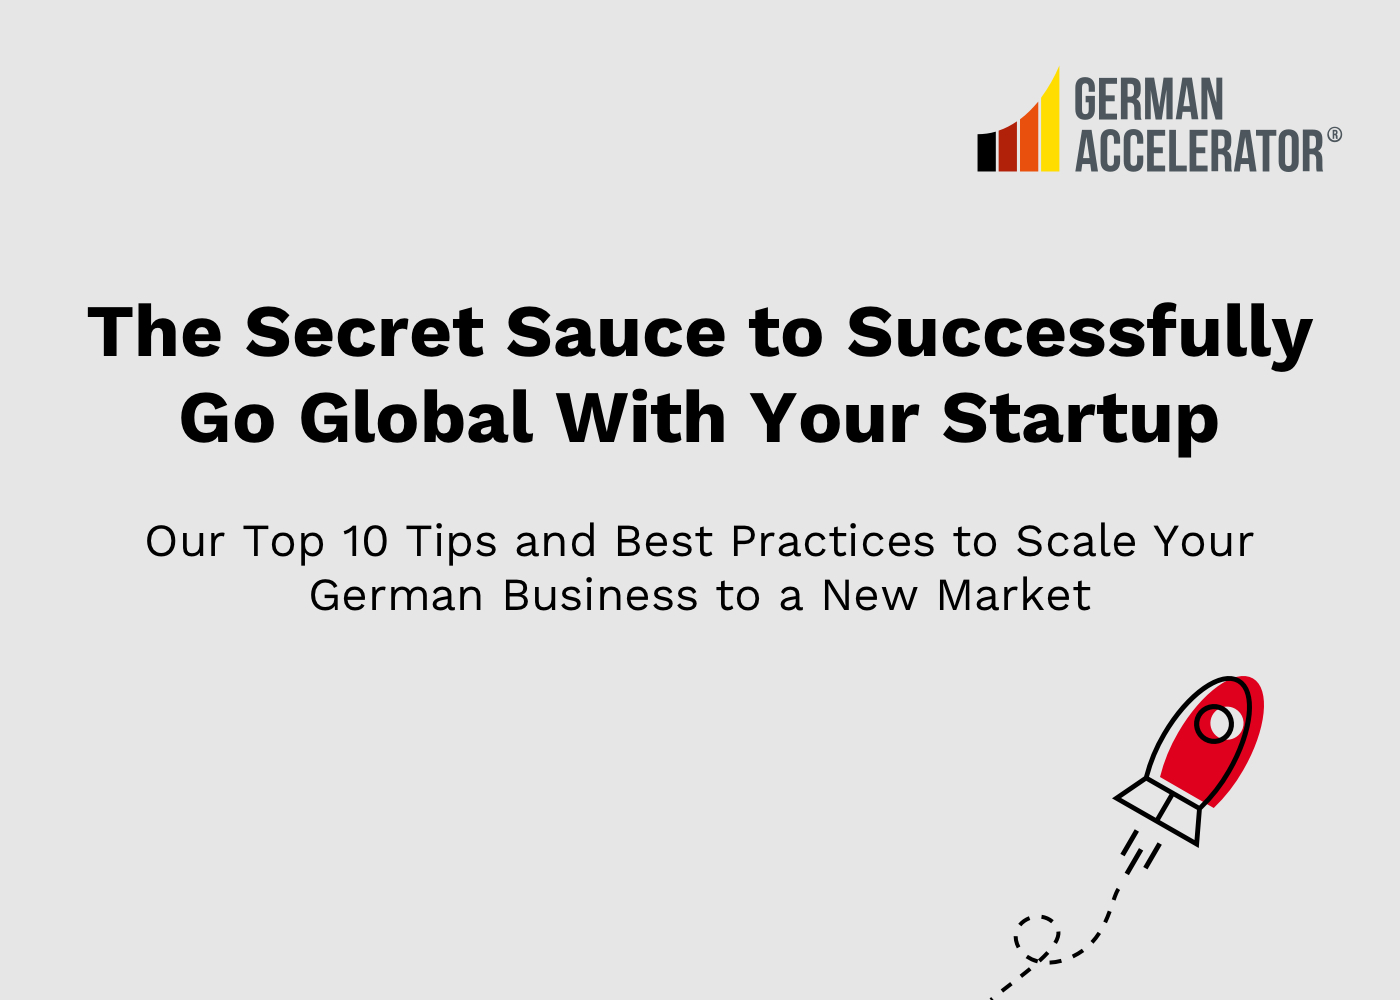 The Secret Sauce to Successfully Go Global With Your Startup